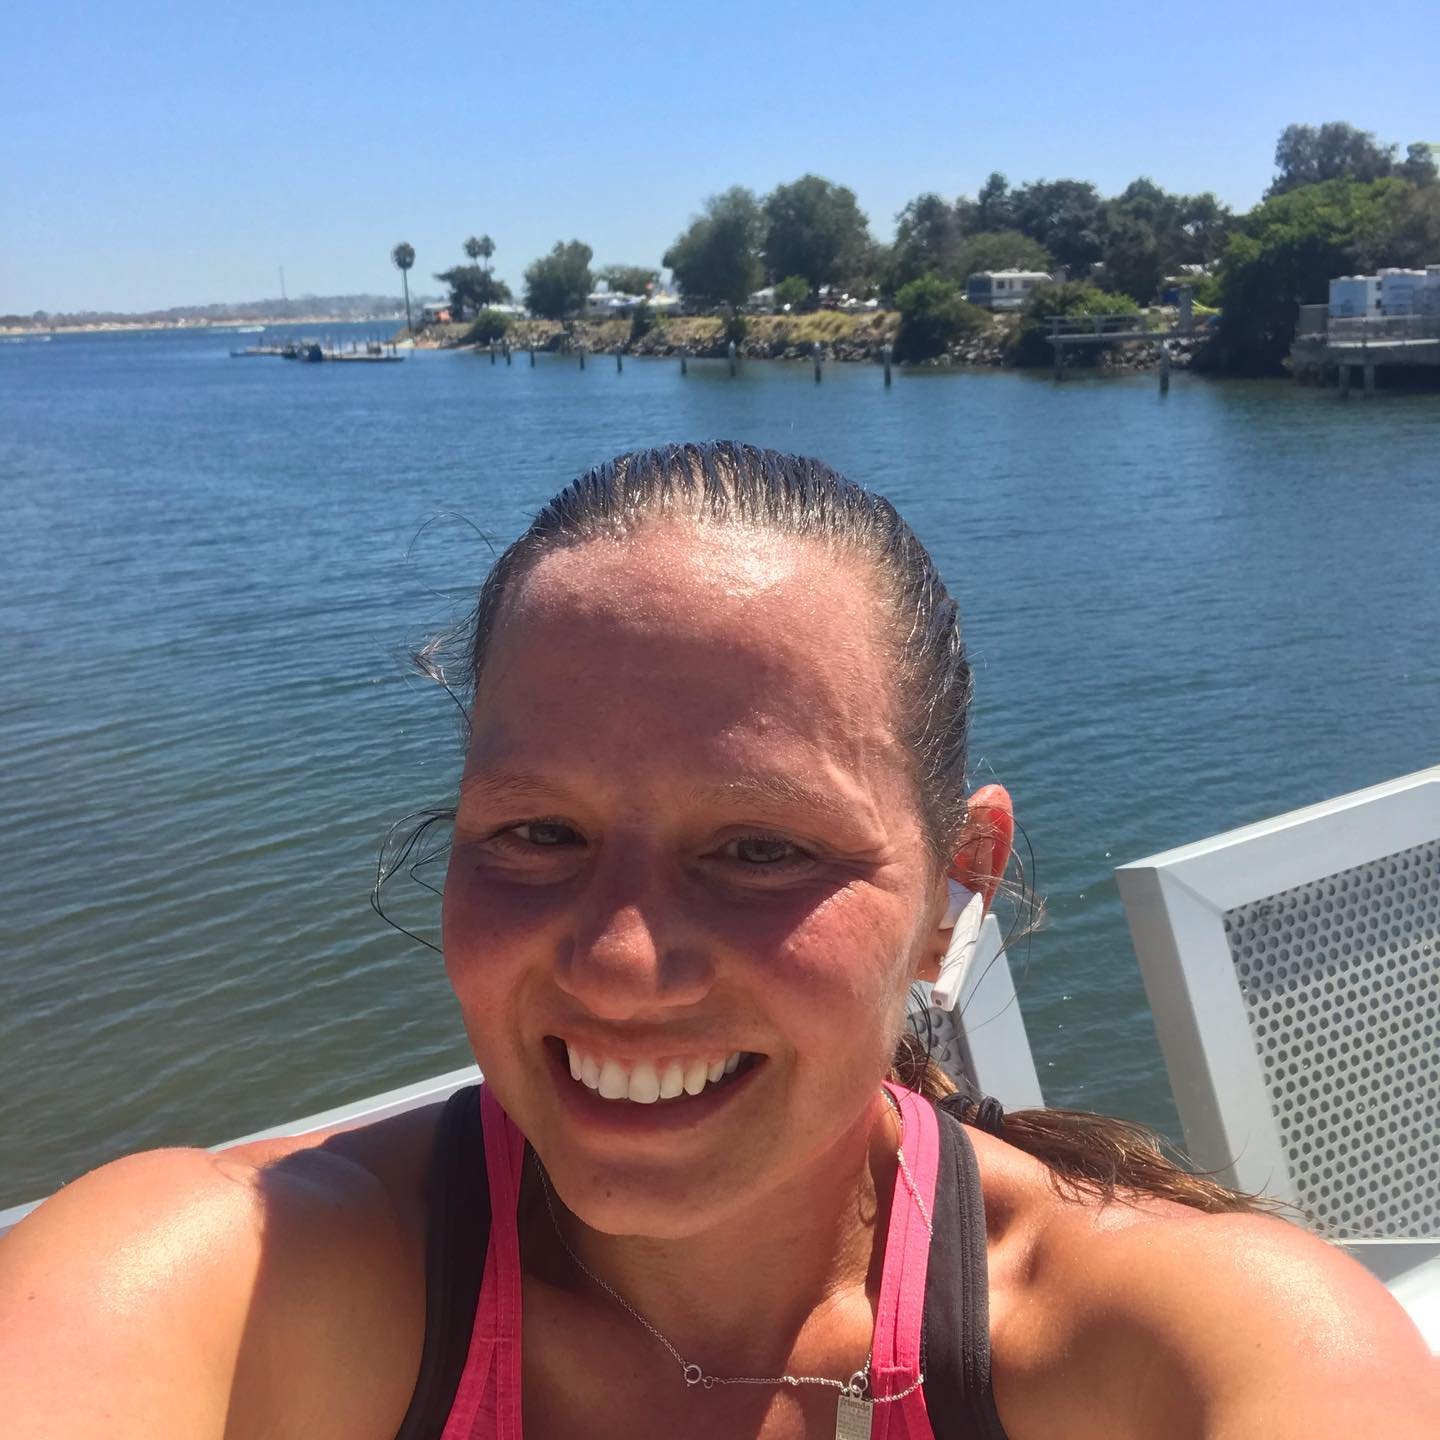 runner Justine Galloway takes a selfie with water in the background.